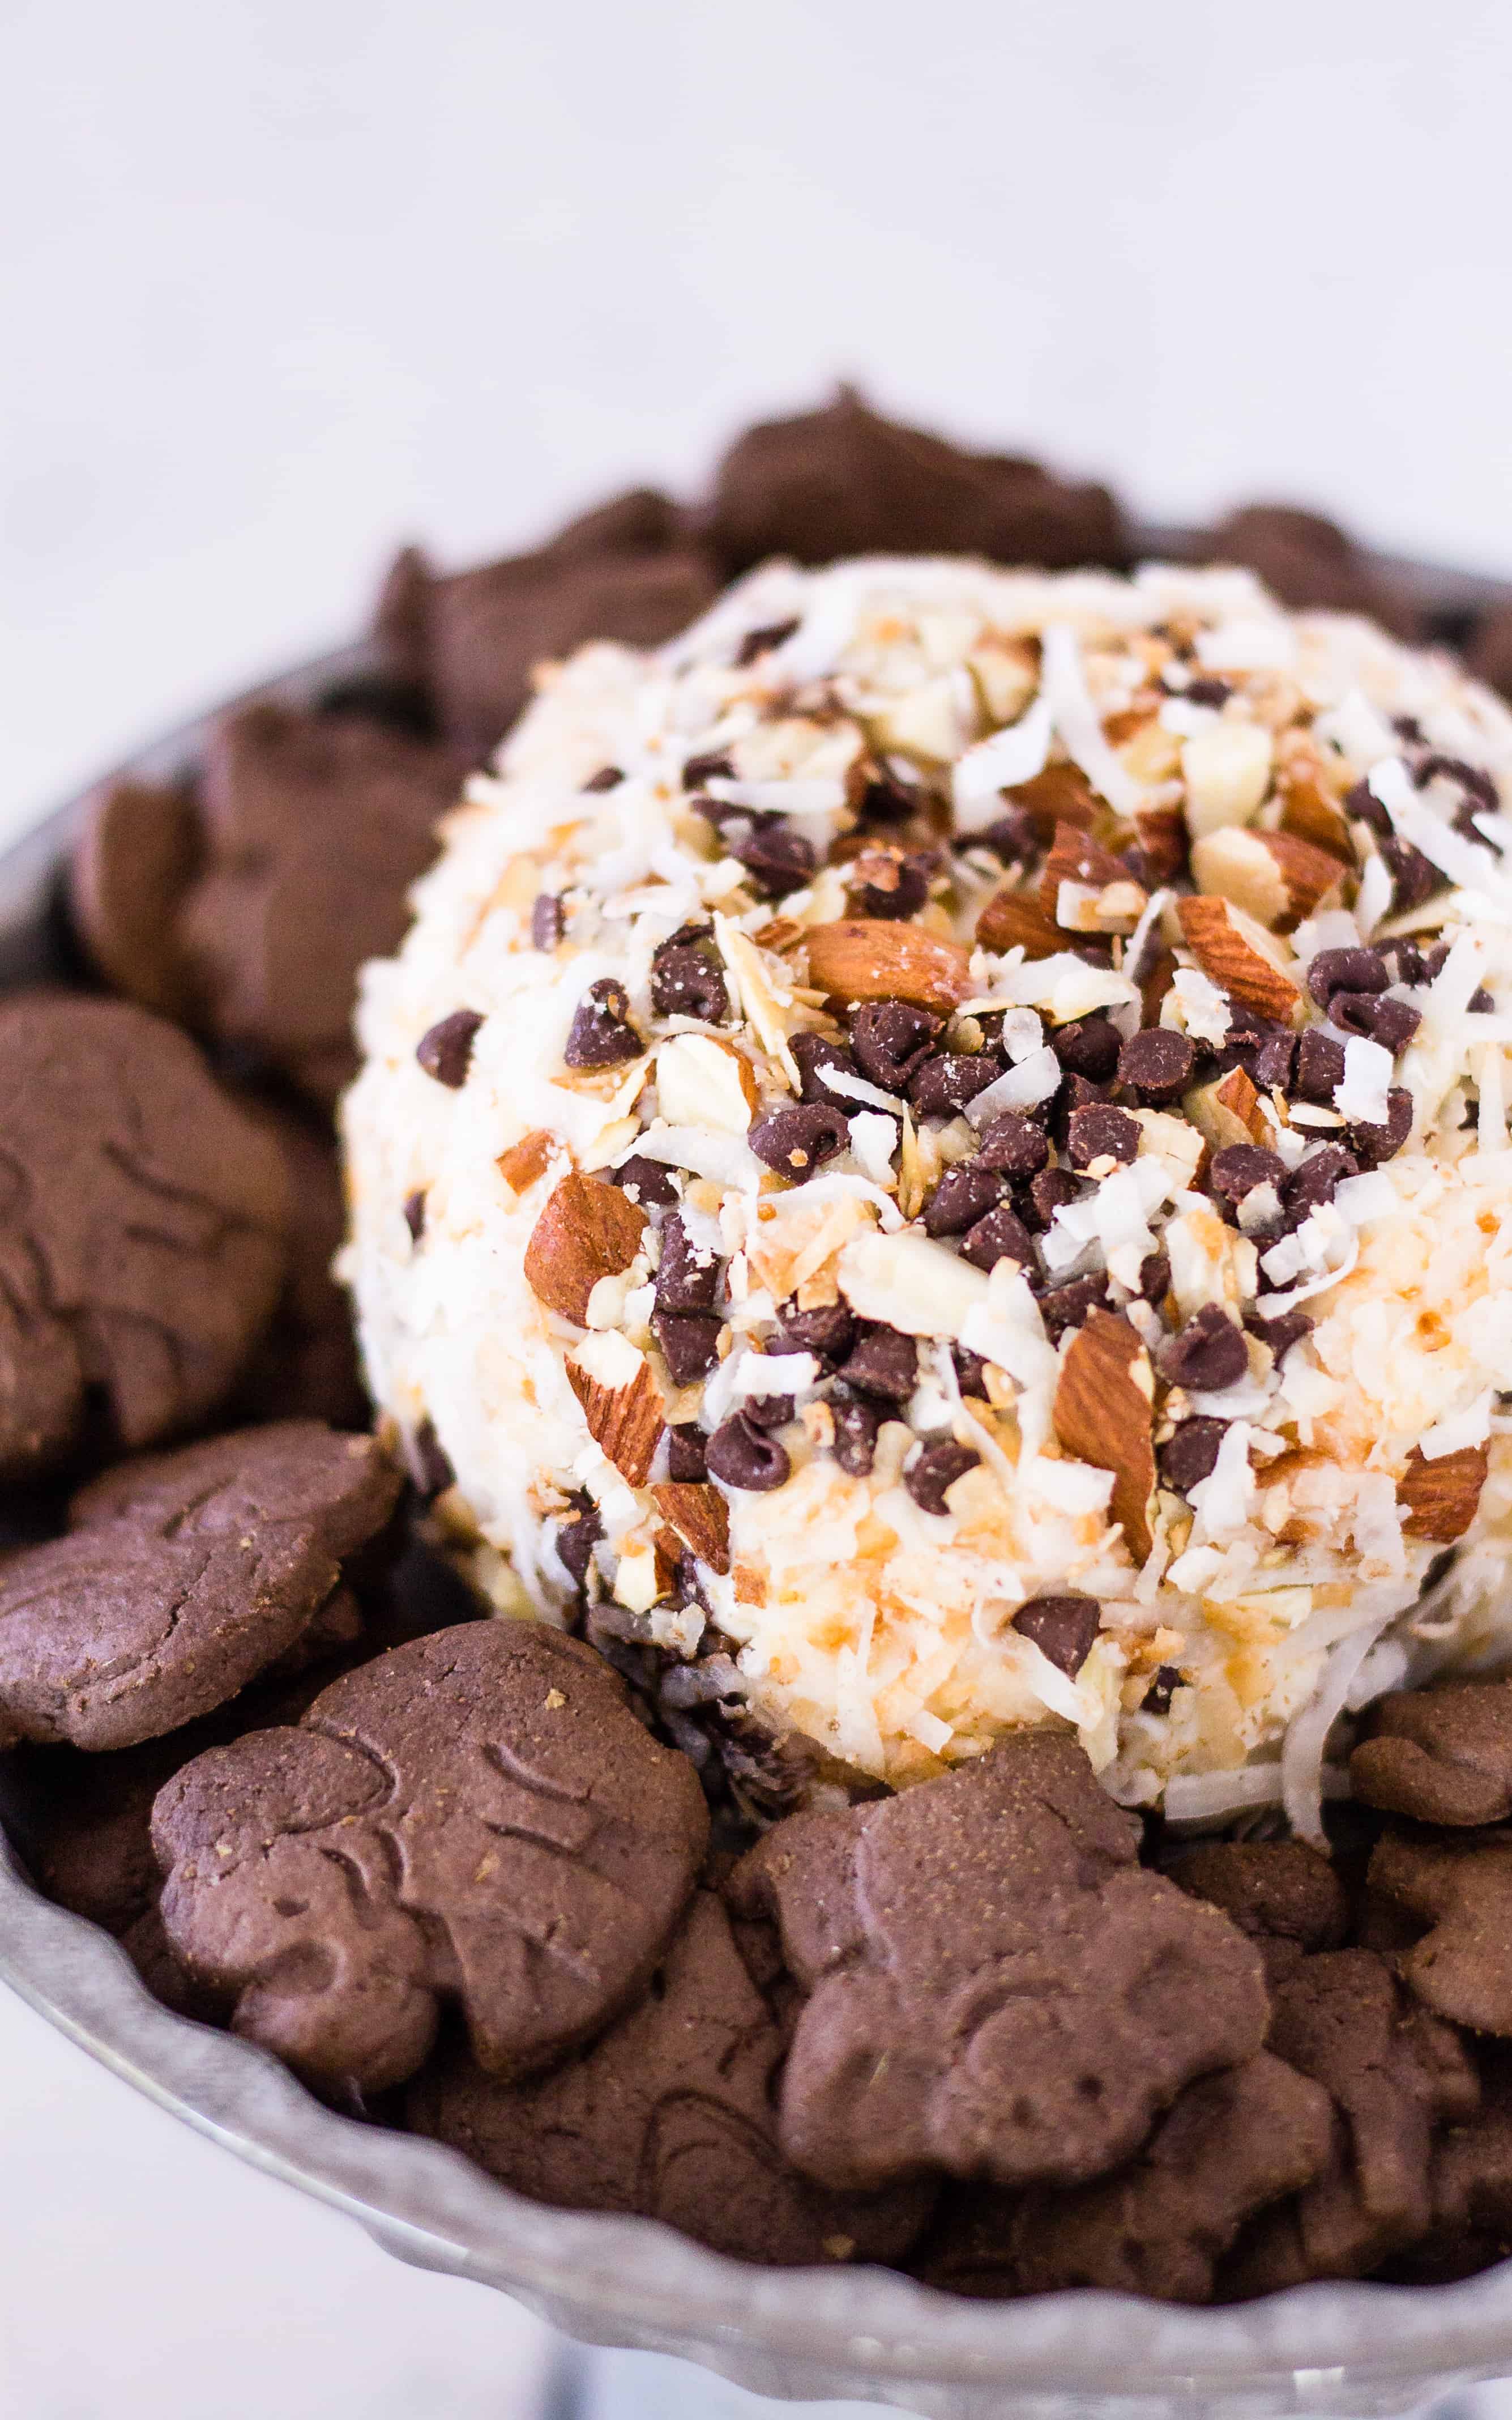 Almond Joy Cheese ball on a platter surrounded by chocolate cookies